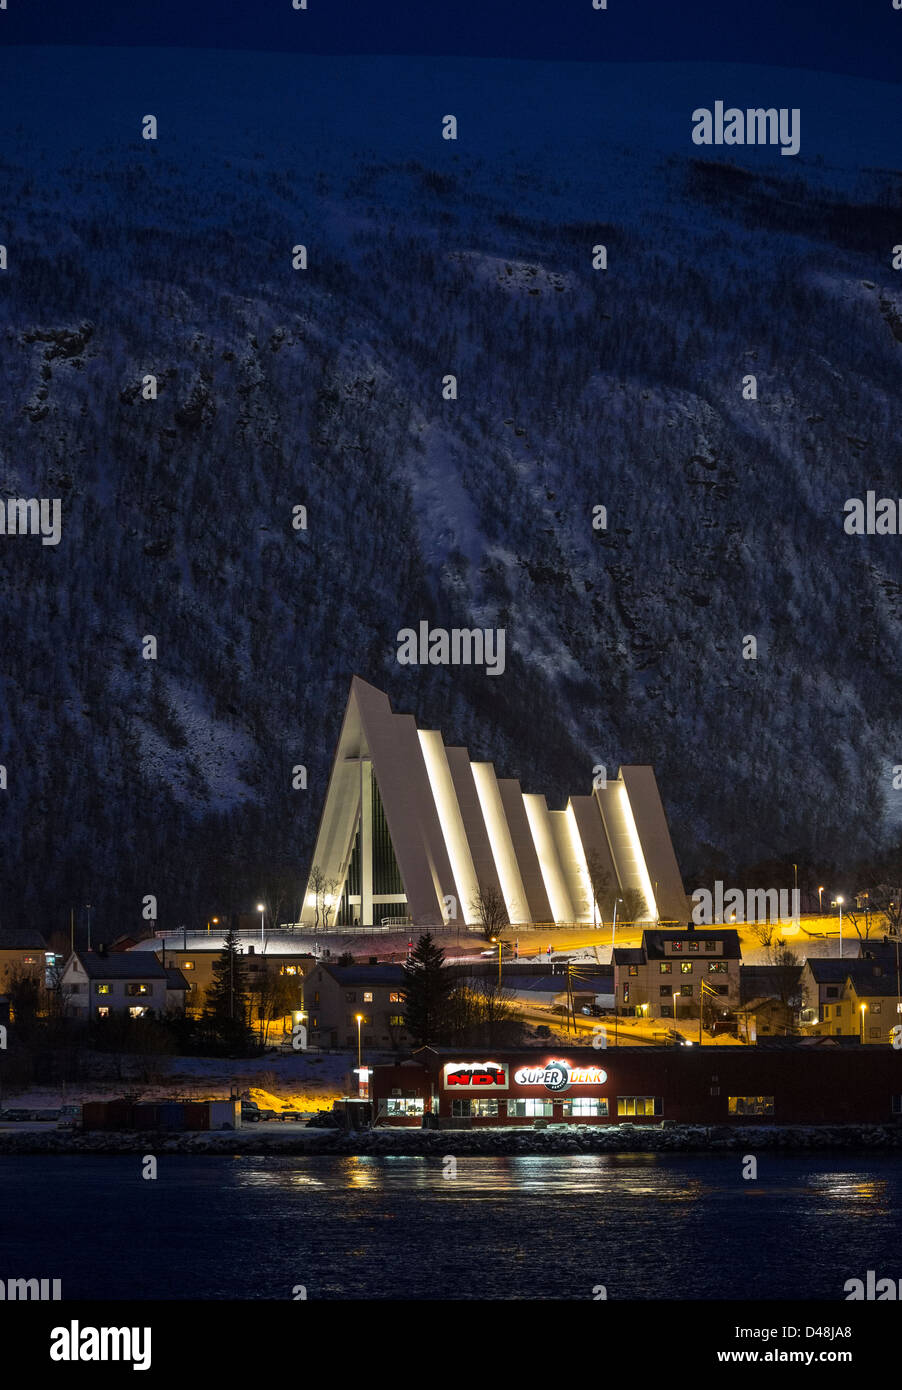 View across Tromso in Norway, towards the Tromsdalen Lutheran Church, by architect Jan Inge Hovig and built of concrete. Stock Photo